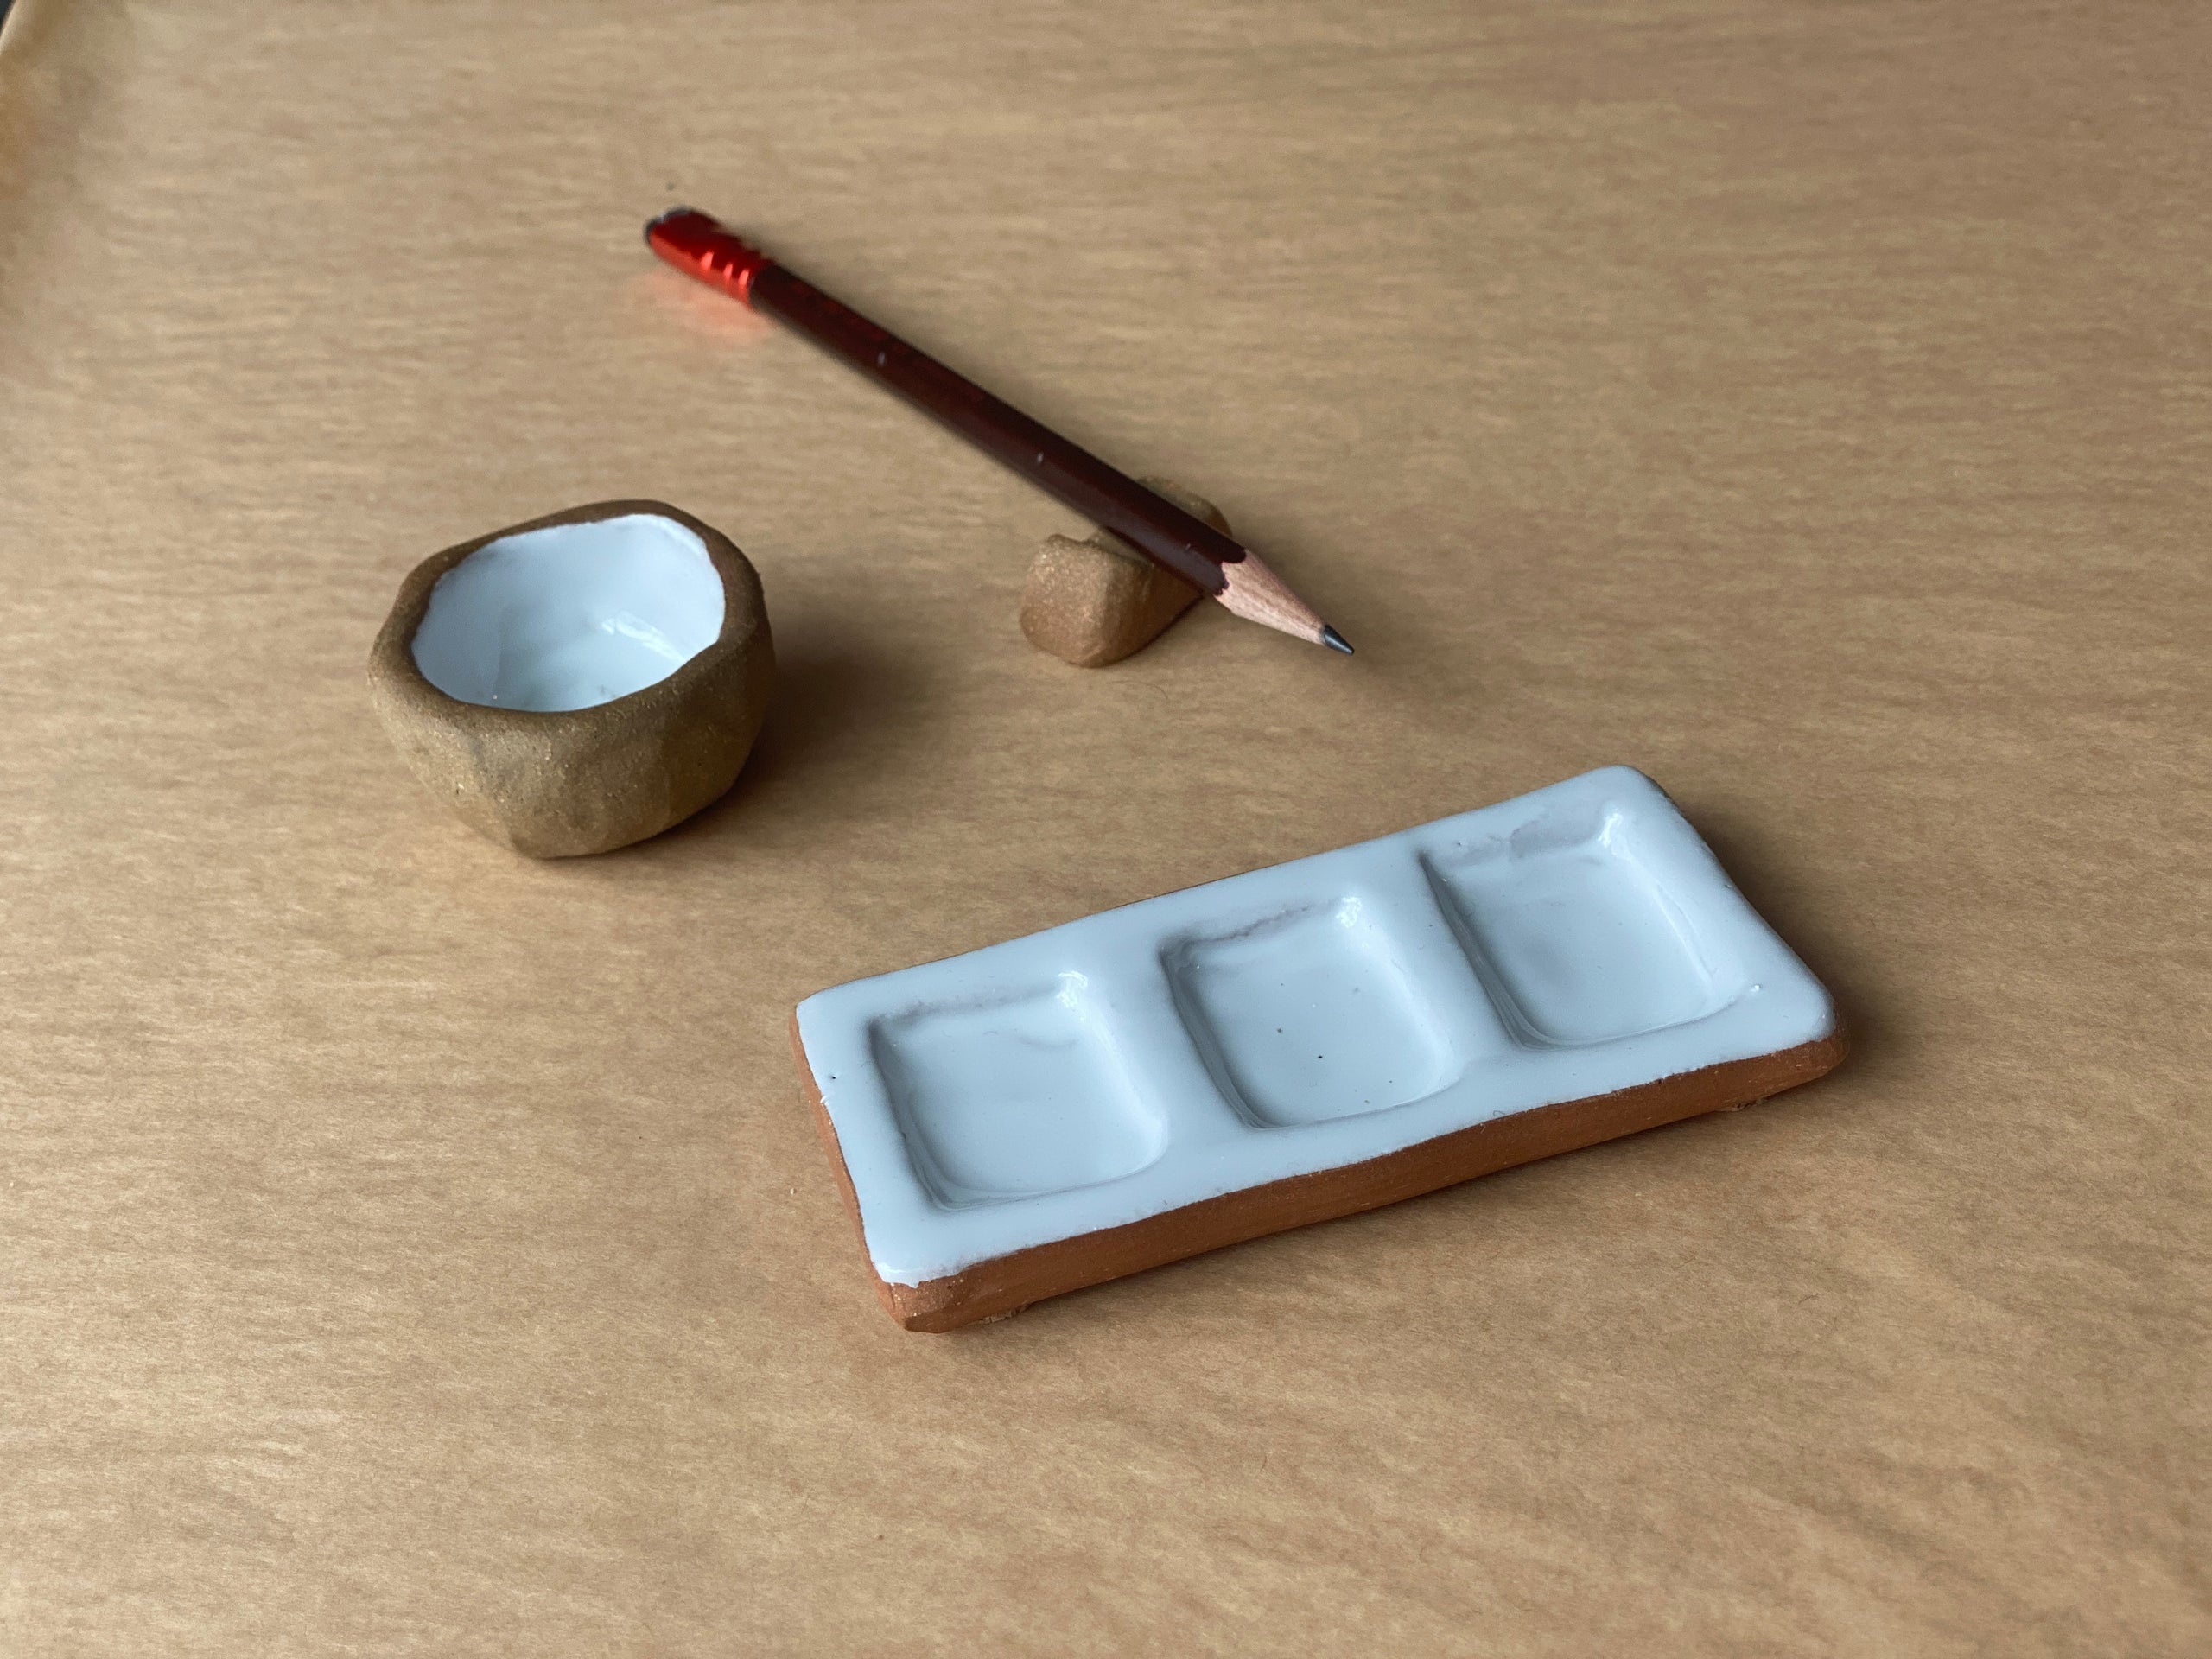 Ceramic Brush Rest and Paintbrush Holder by Busy Hands Studio